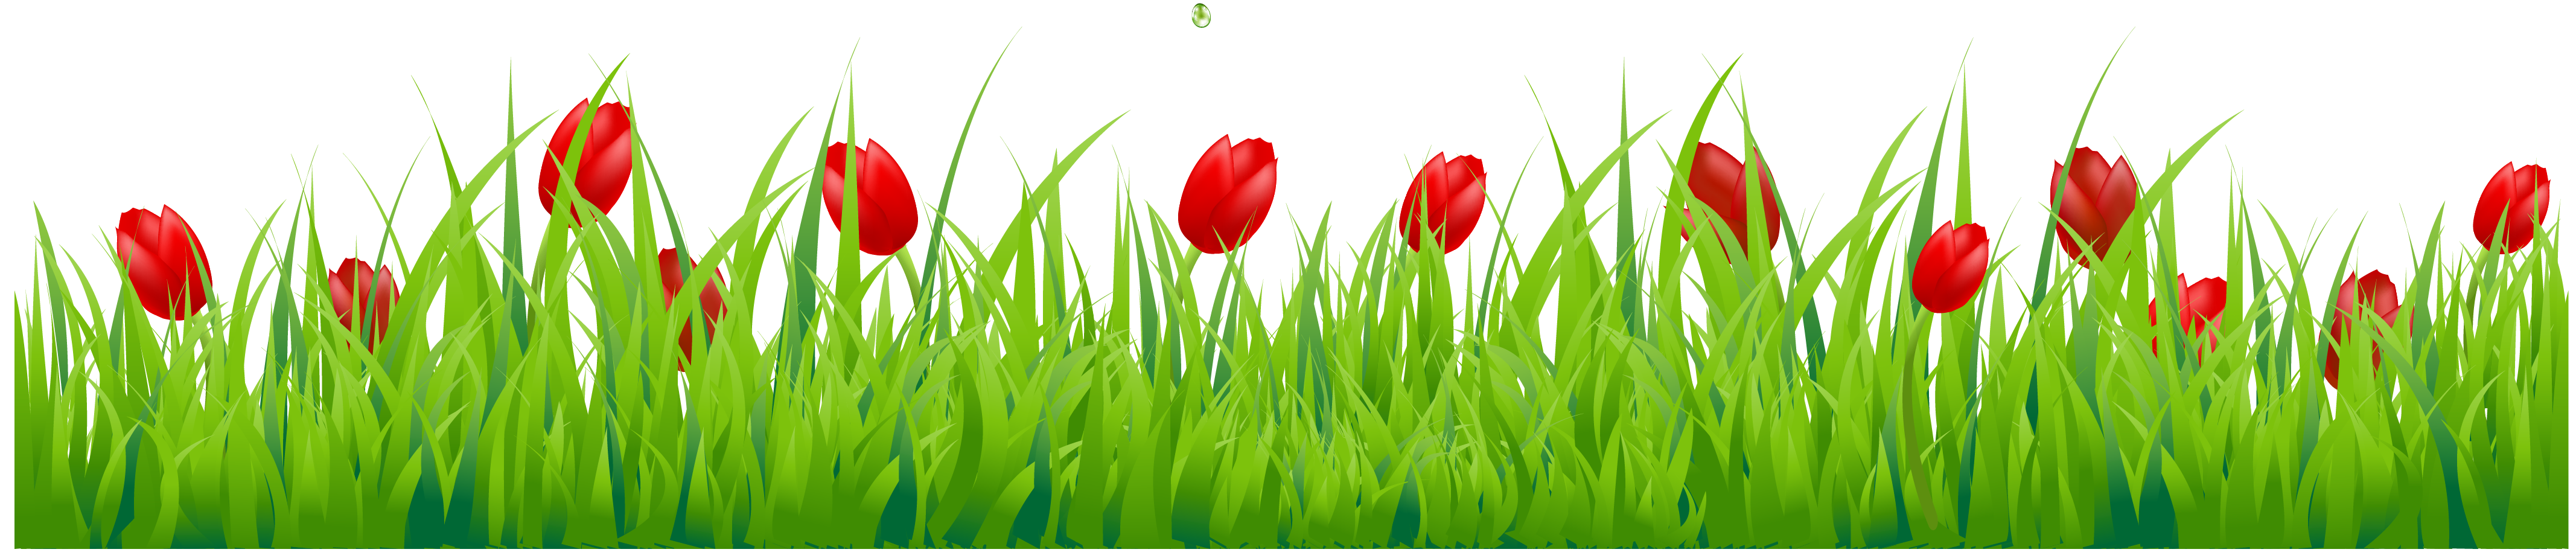 Clipart border tulip. Grass with red tulips